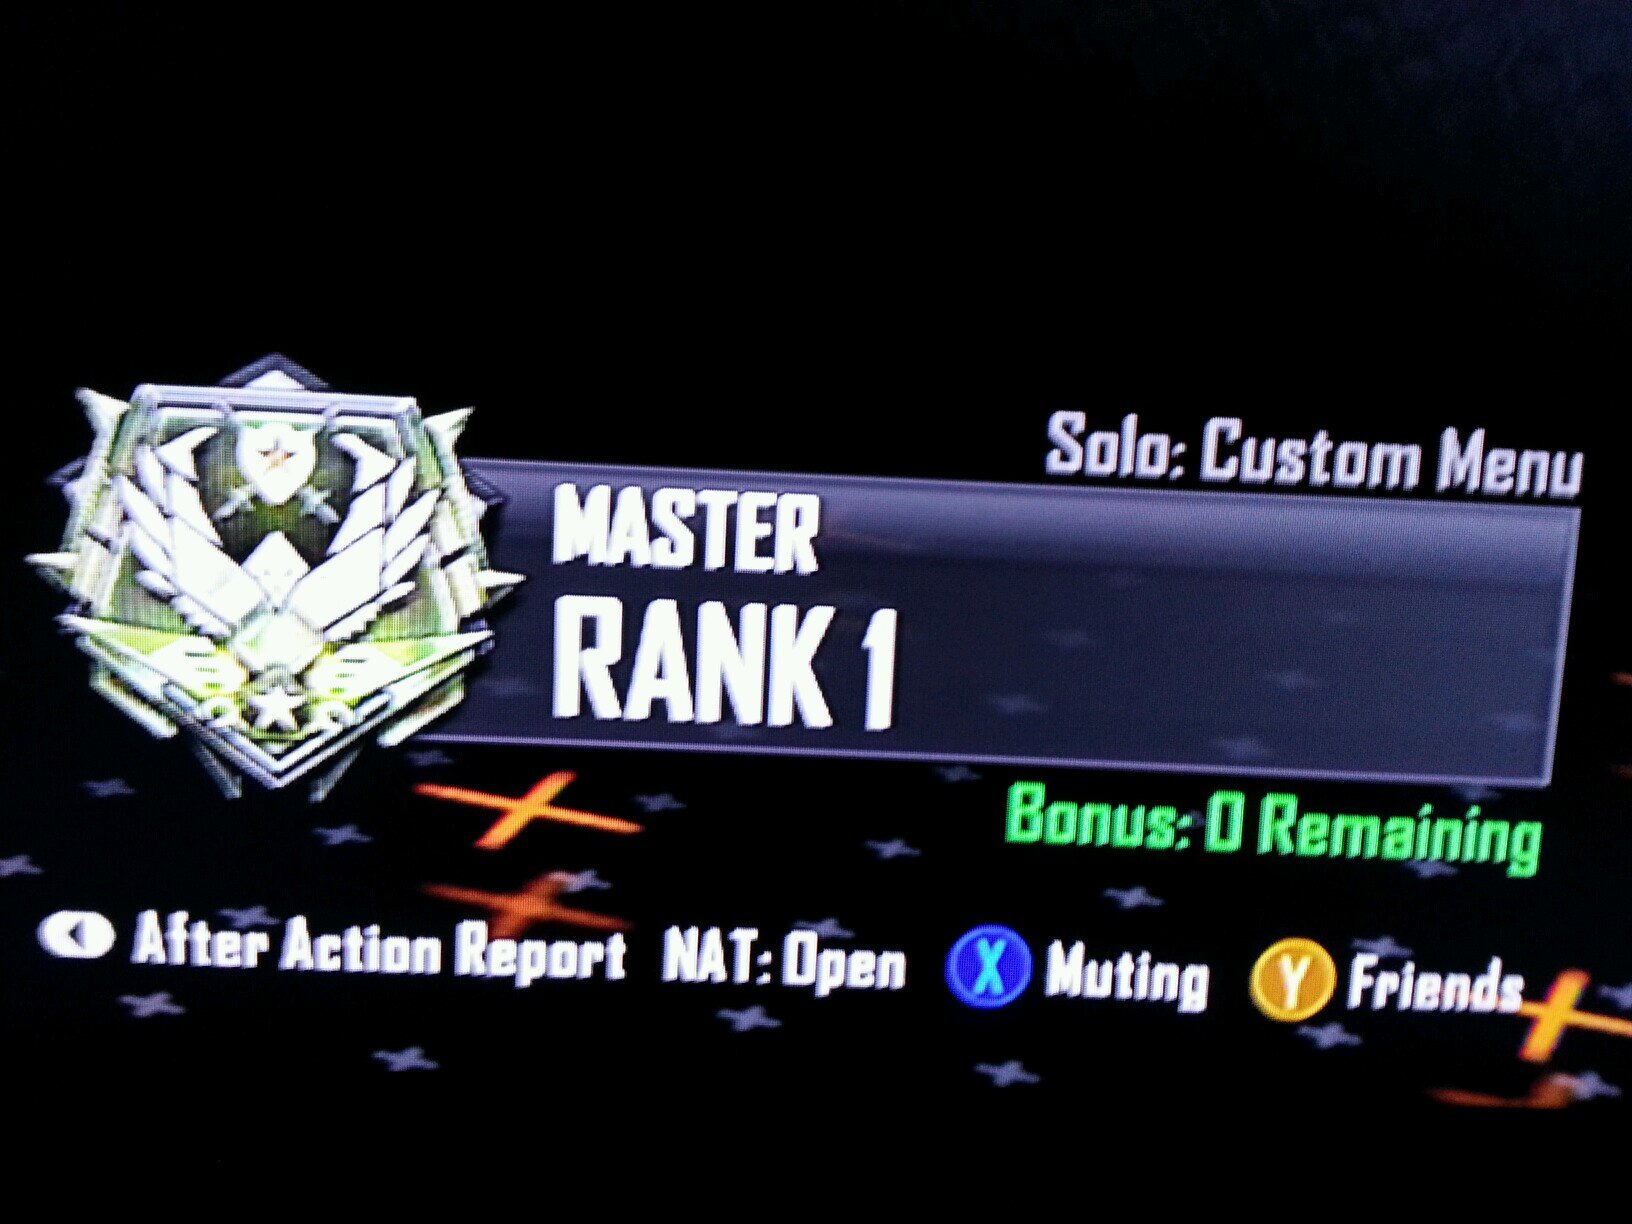 Took Rank 1 on Blitz for Cod Ghost!